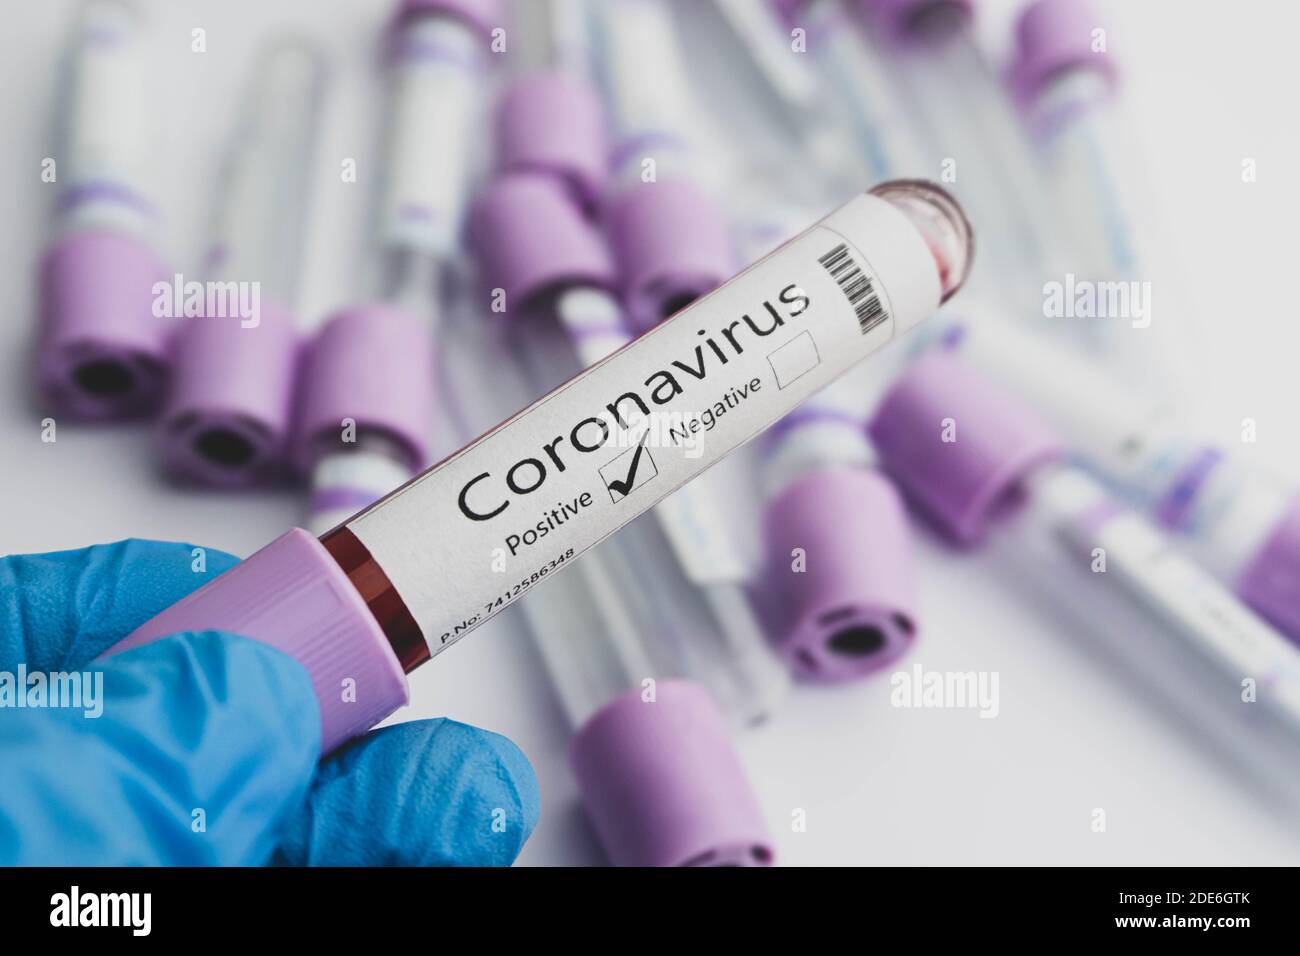 Blood test samples for presence of coronavirus (COVID-19) tube containing a blood sample that has tested positive for coronavirus. Covid-19 concept. Stock Photo